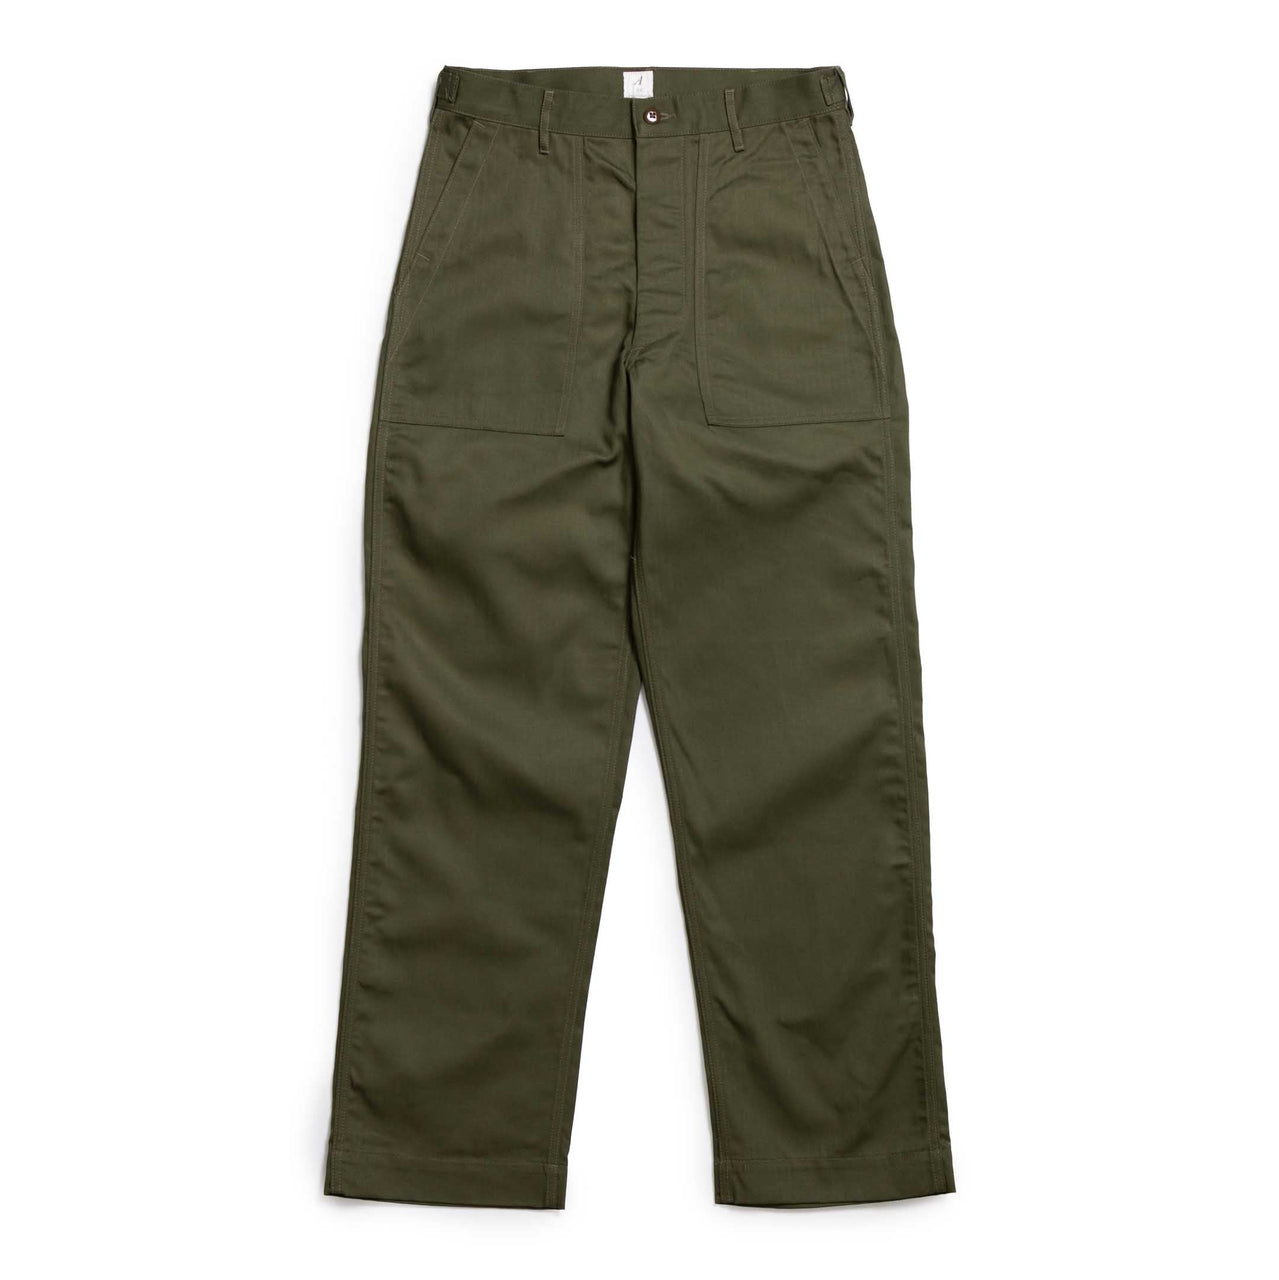 Anatomica 1947 HBT Utility Pant Olive Drab-Trousers-Clutch Cafe